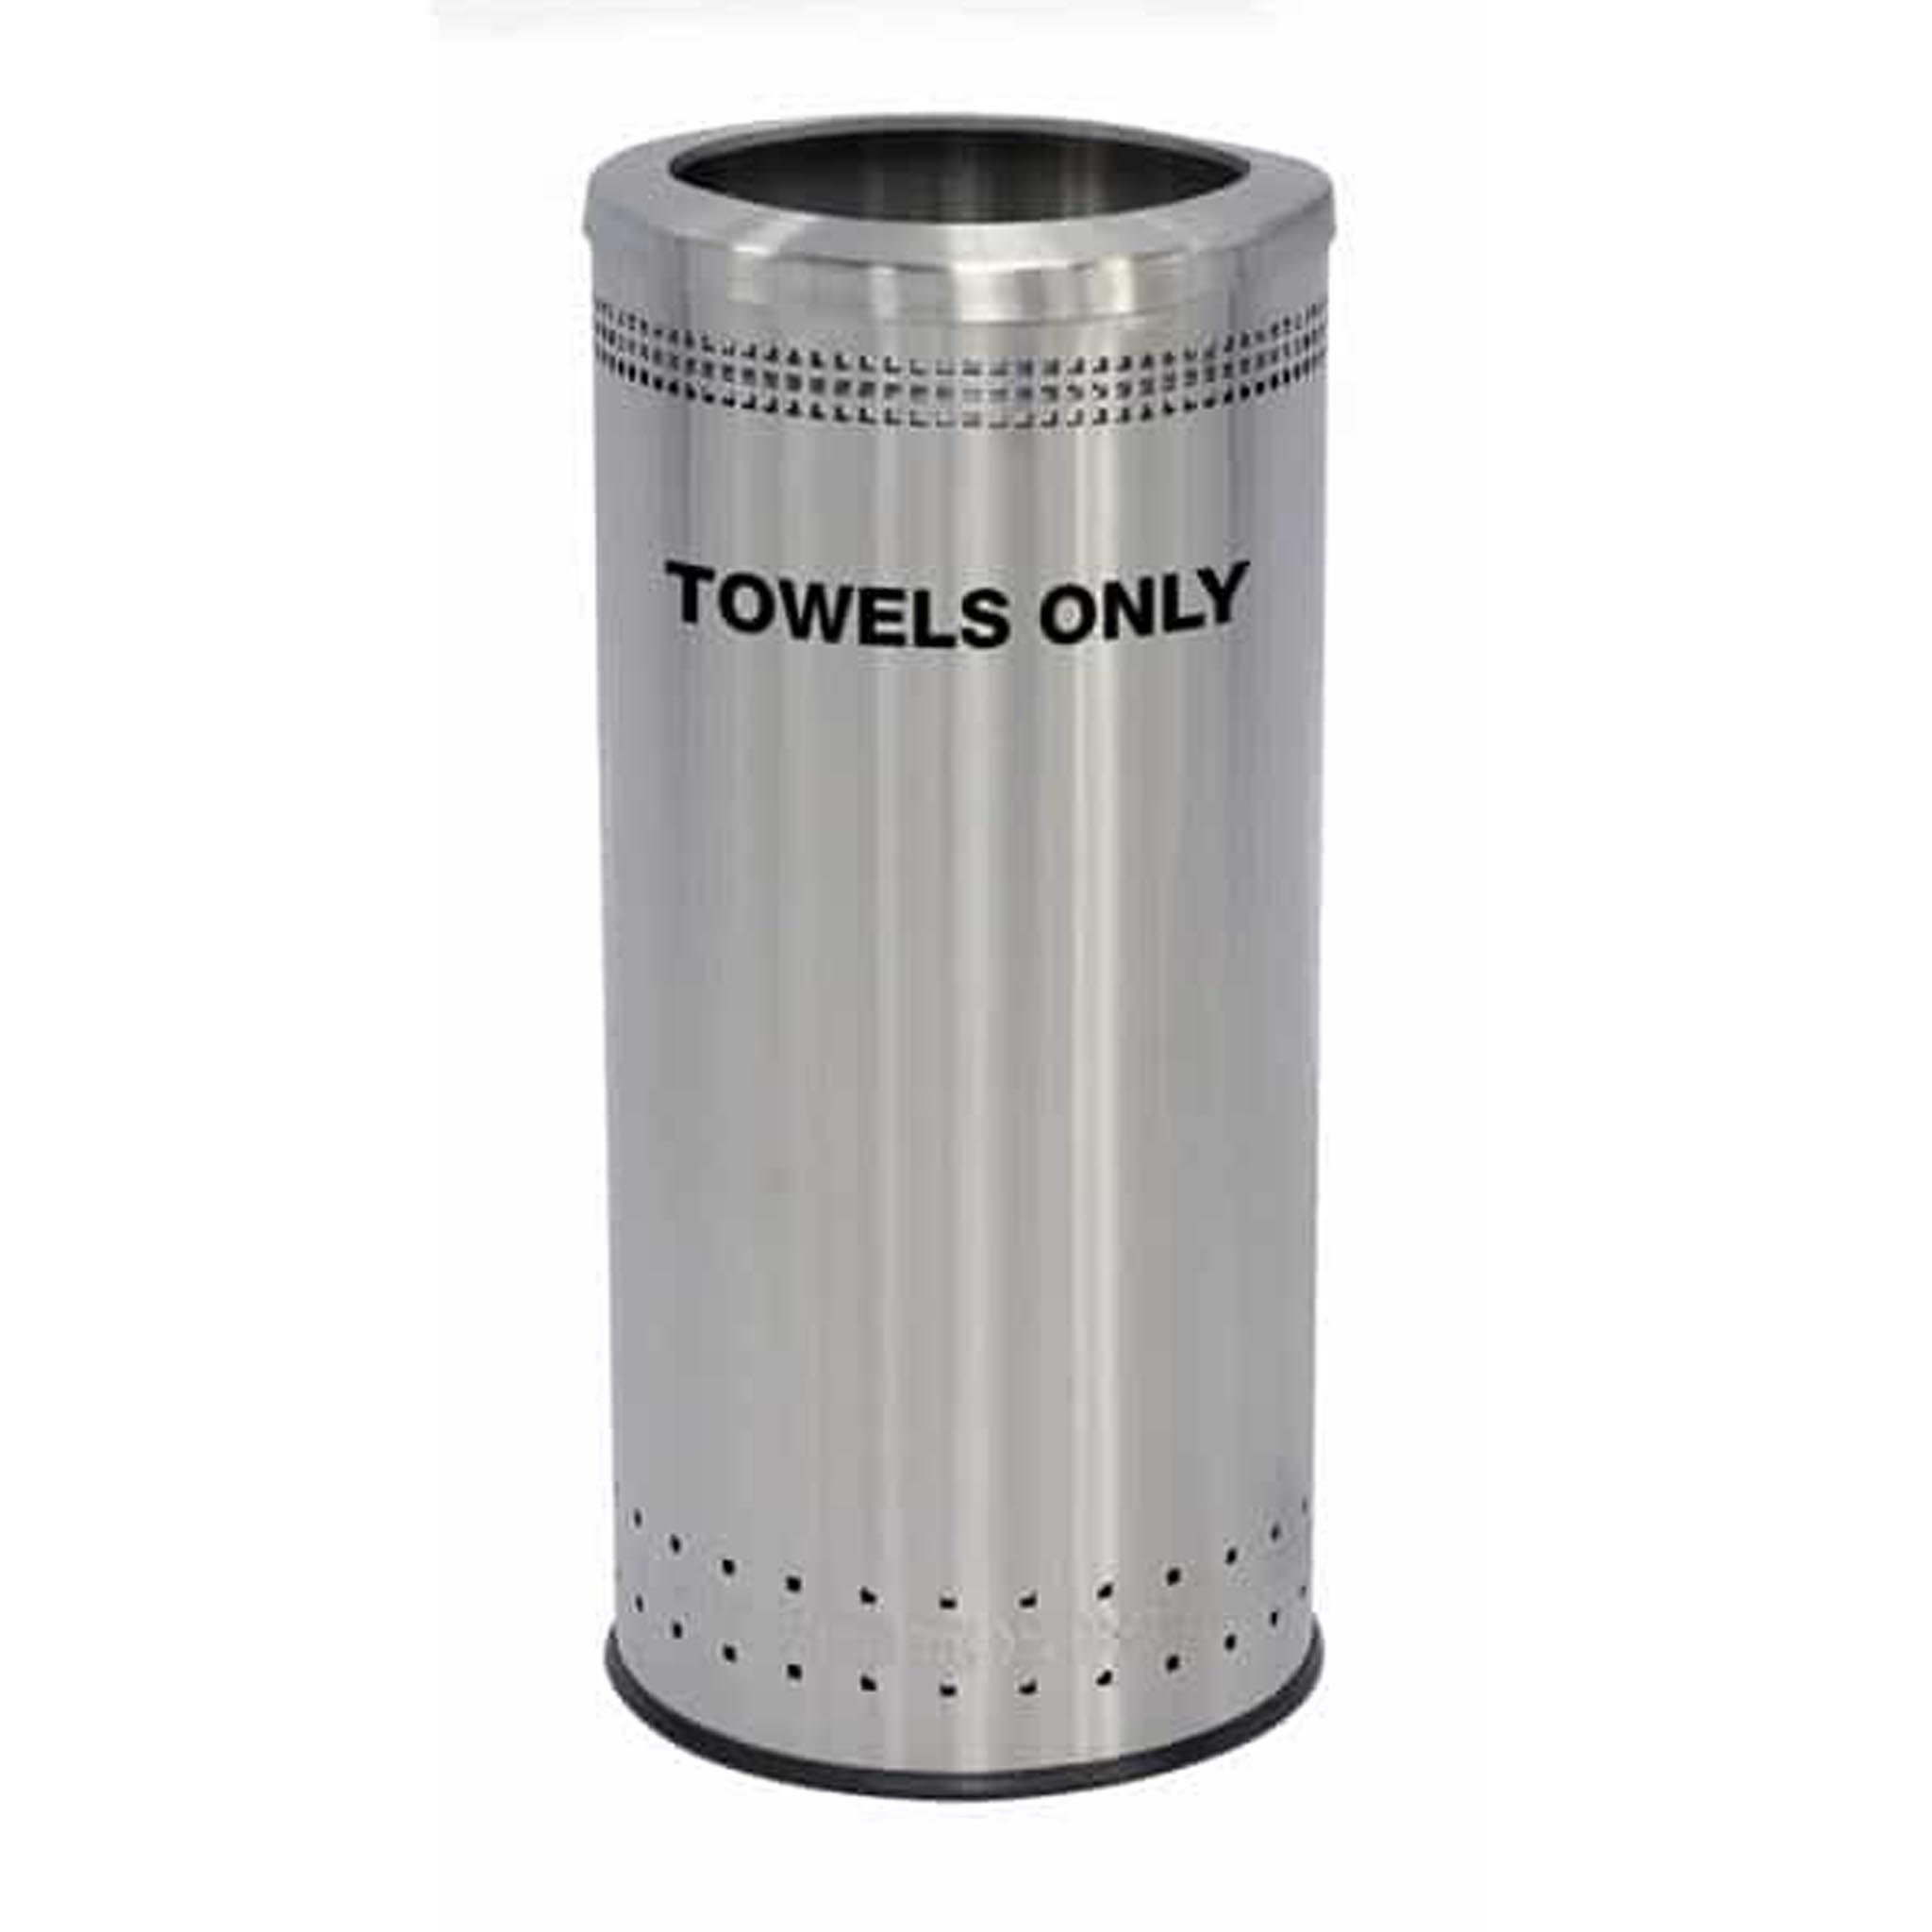 Precision Series® Imprinted Towel Container, 25-Gallon Round, Open-Top Lid